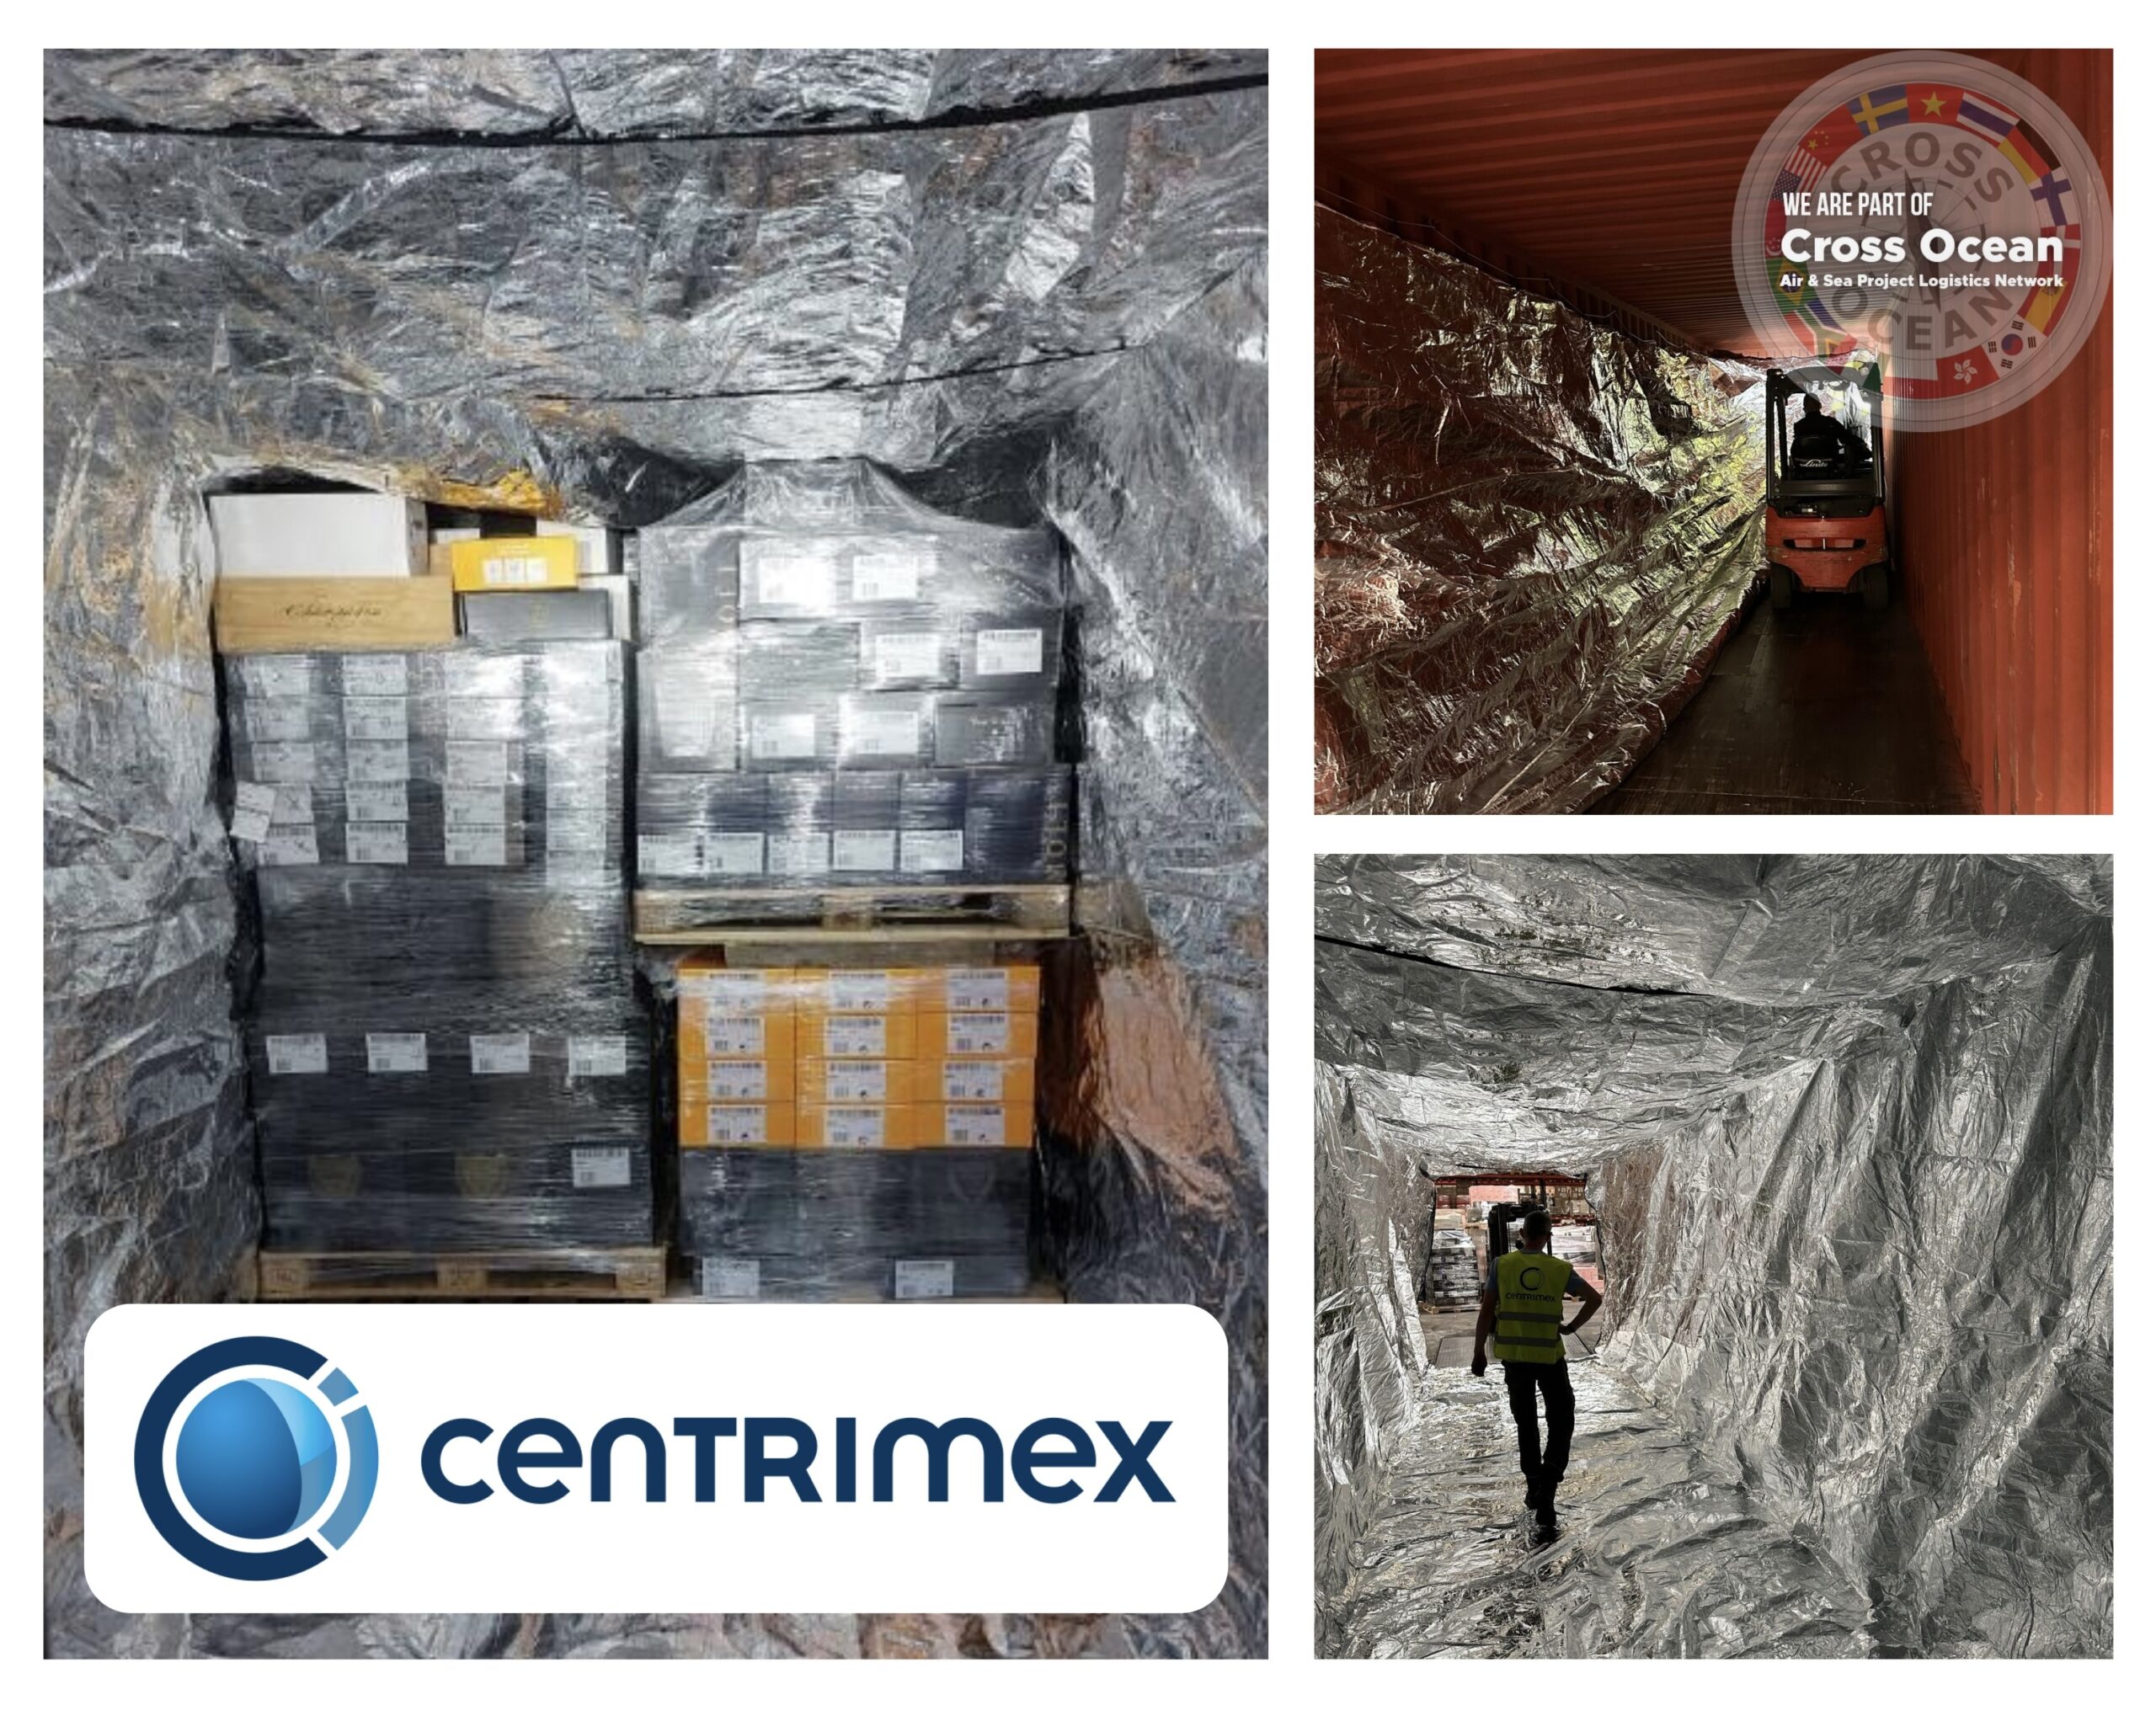 Centrimex Equips Container for Champagne Shipment to Nigeria